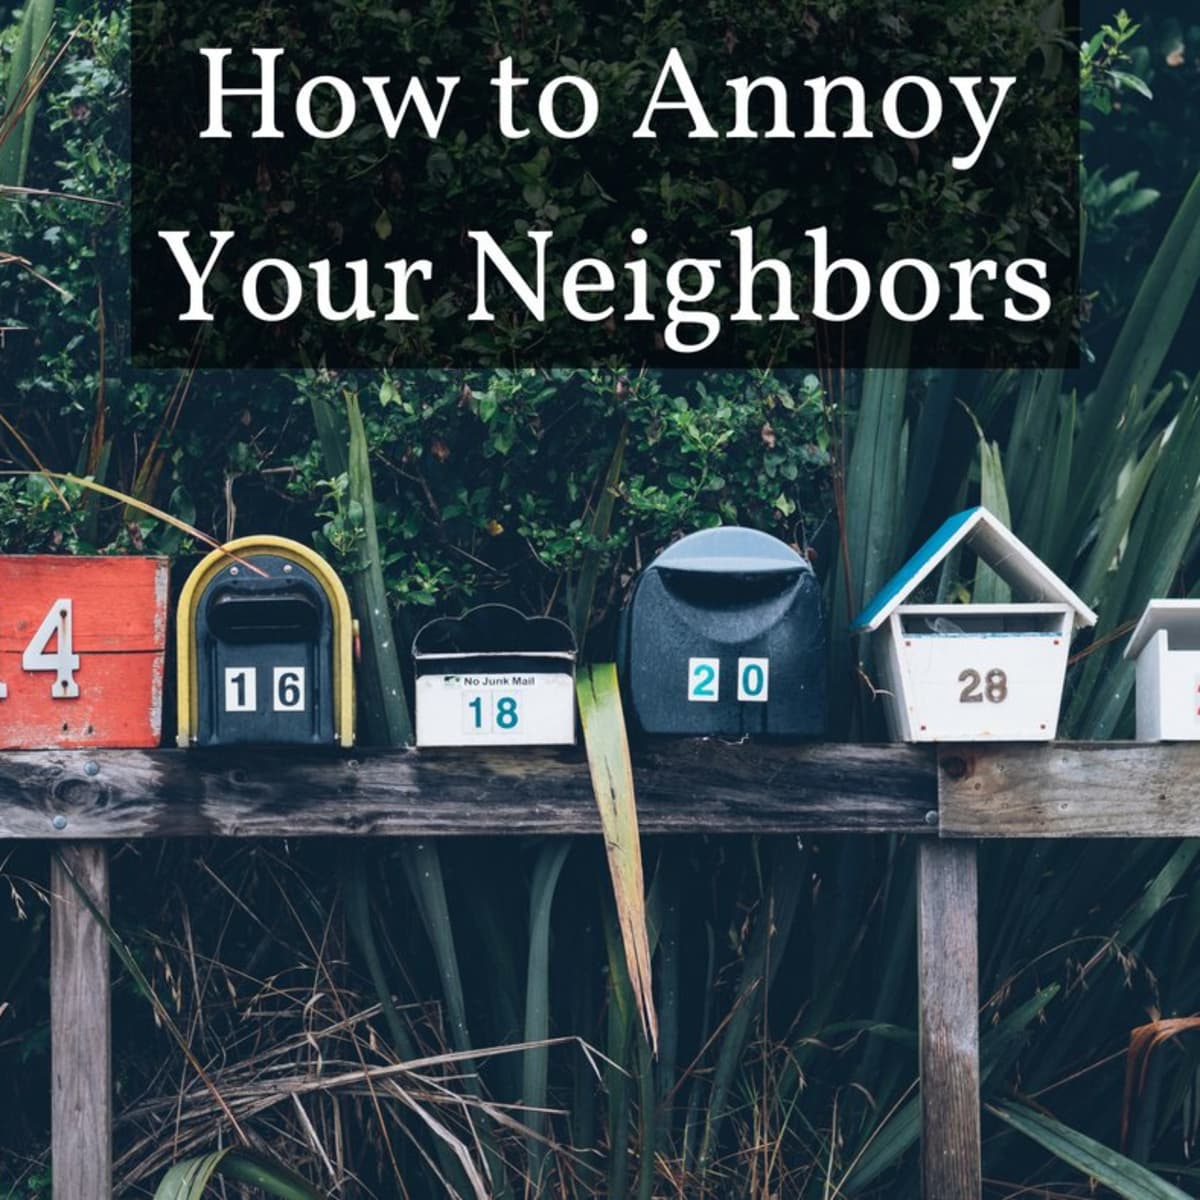 25 Ways to Annoy Your Neighbors